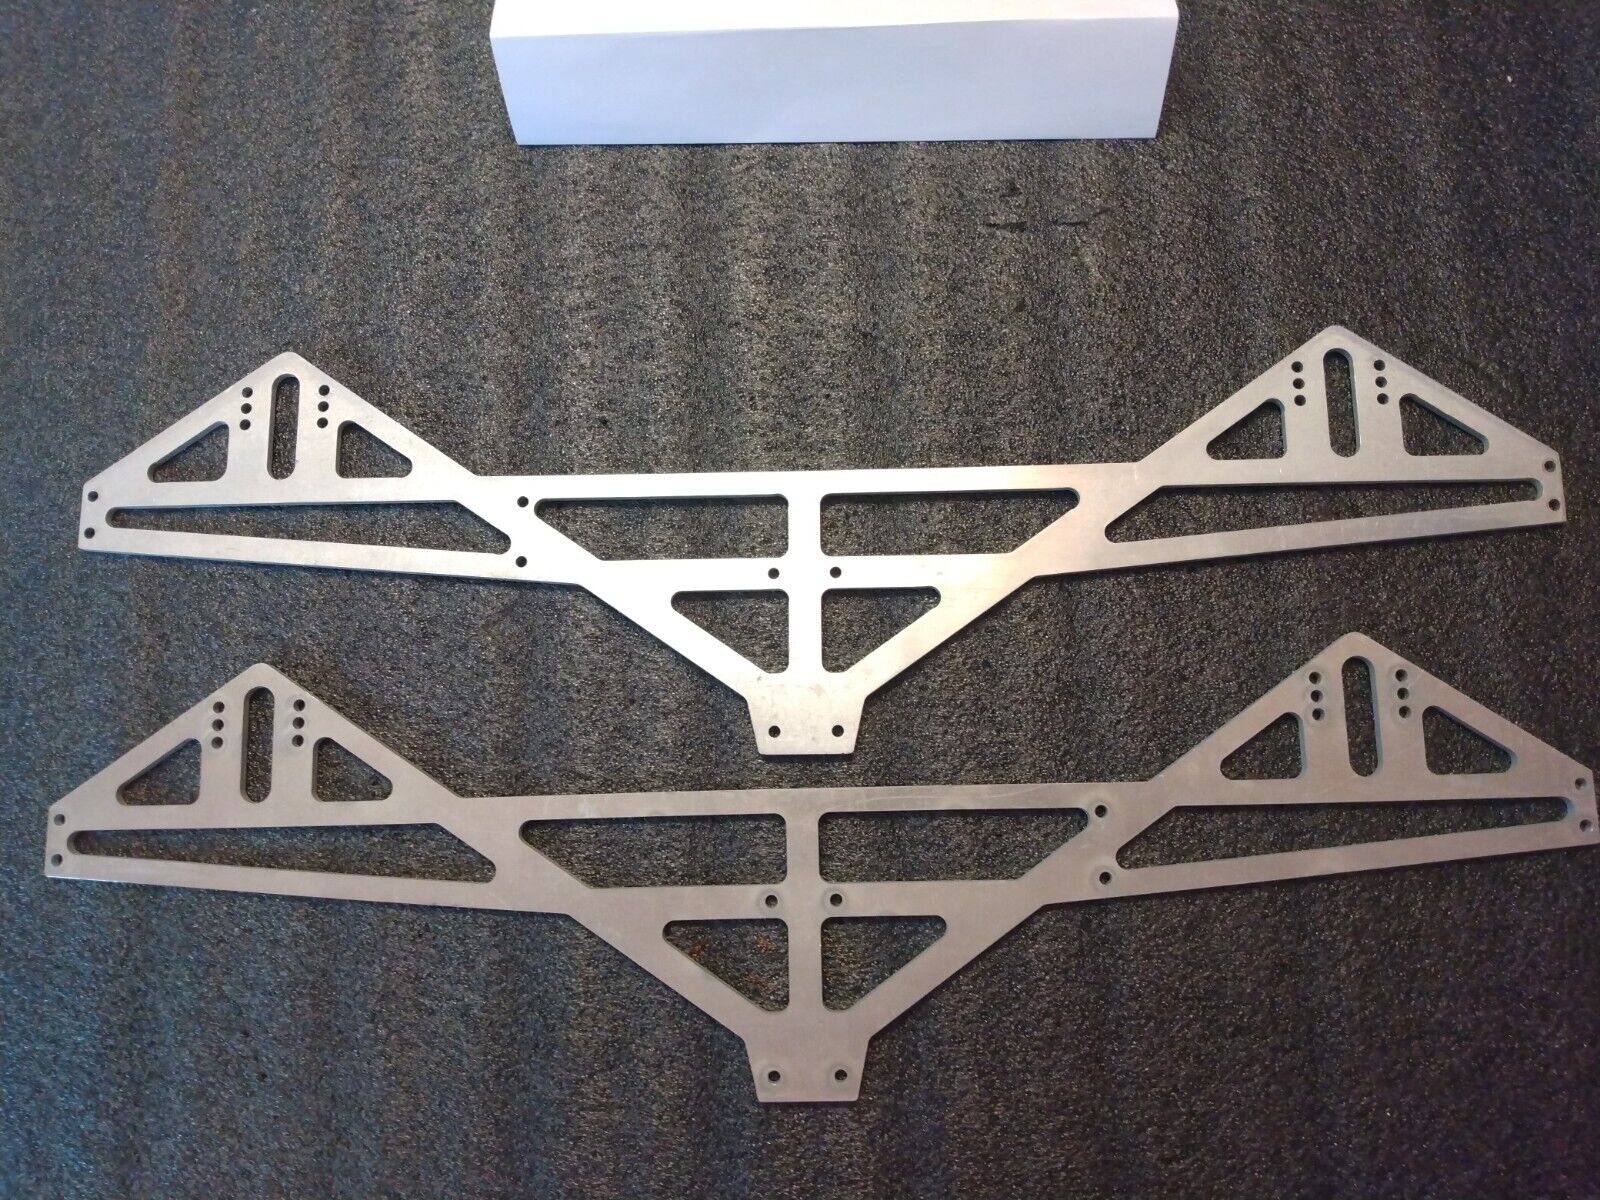 New 1/8 scale TXT clod axial AE hpi losi Kyosho style rc truck chassis plates